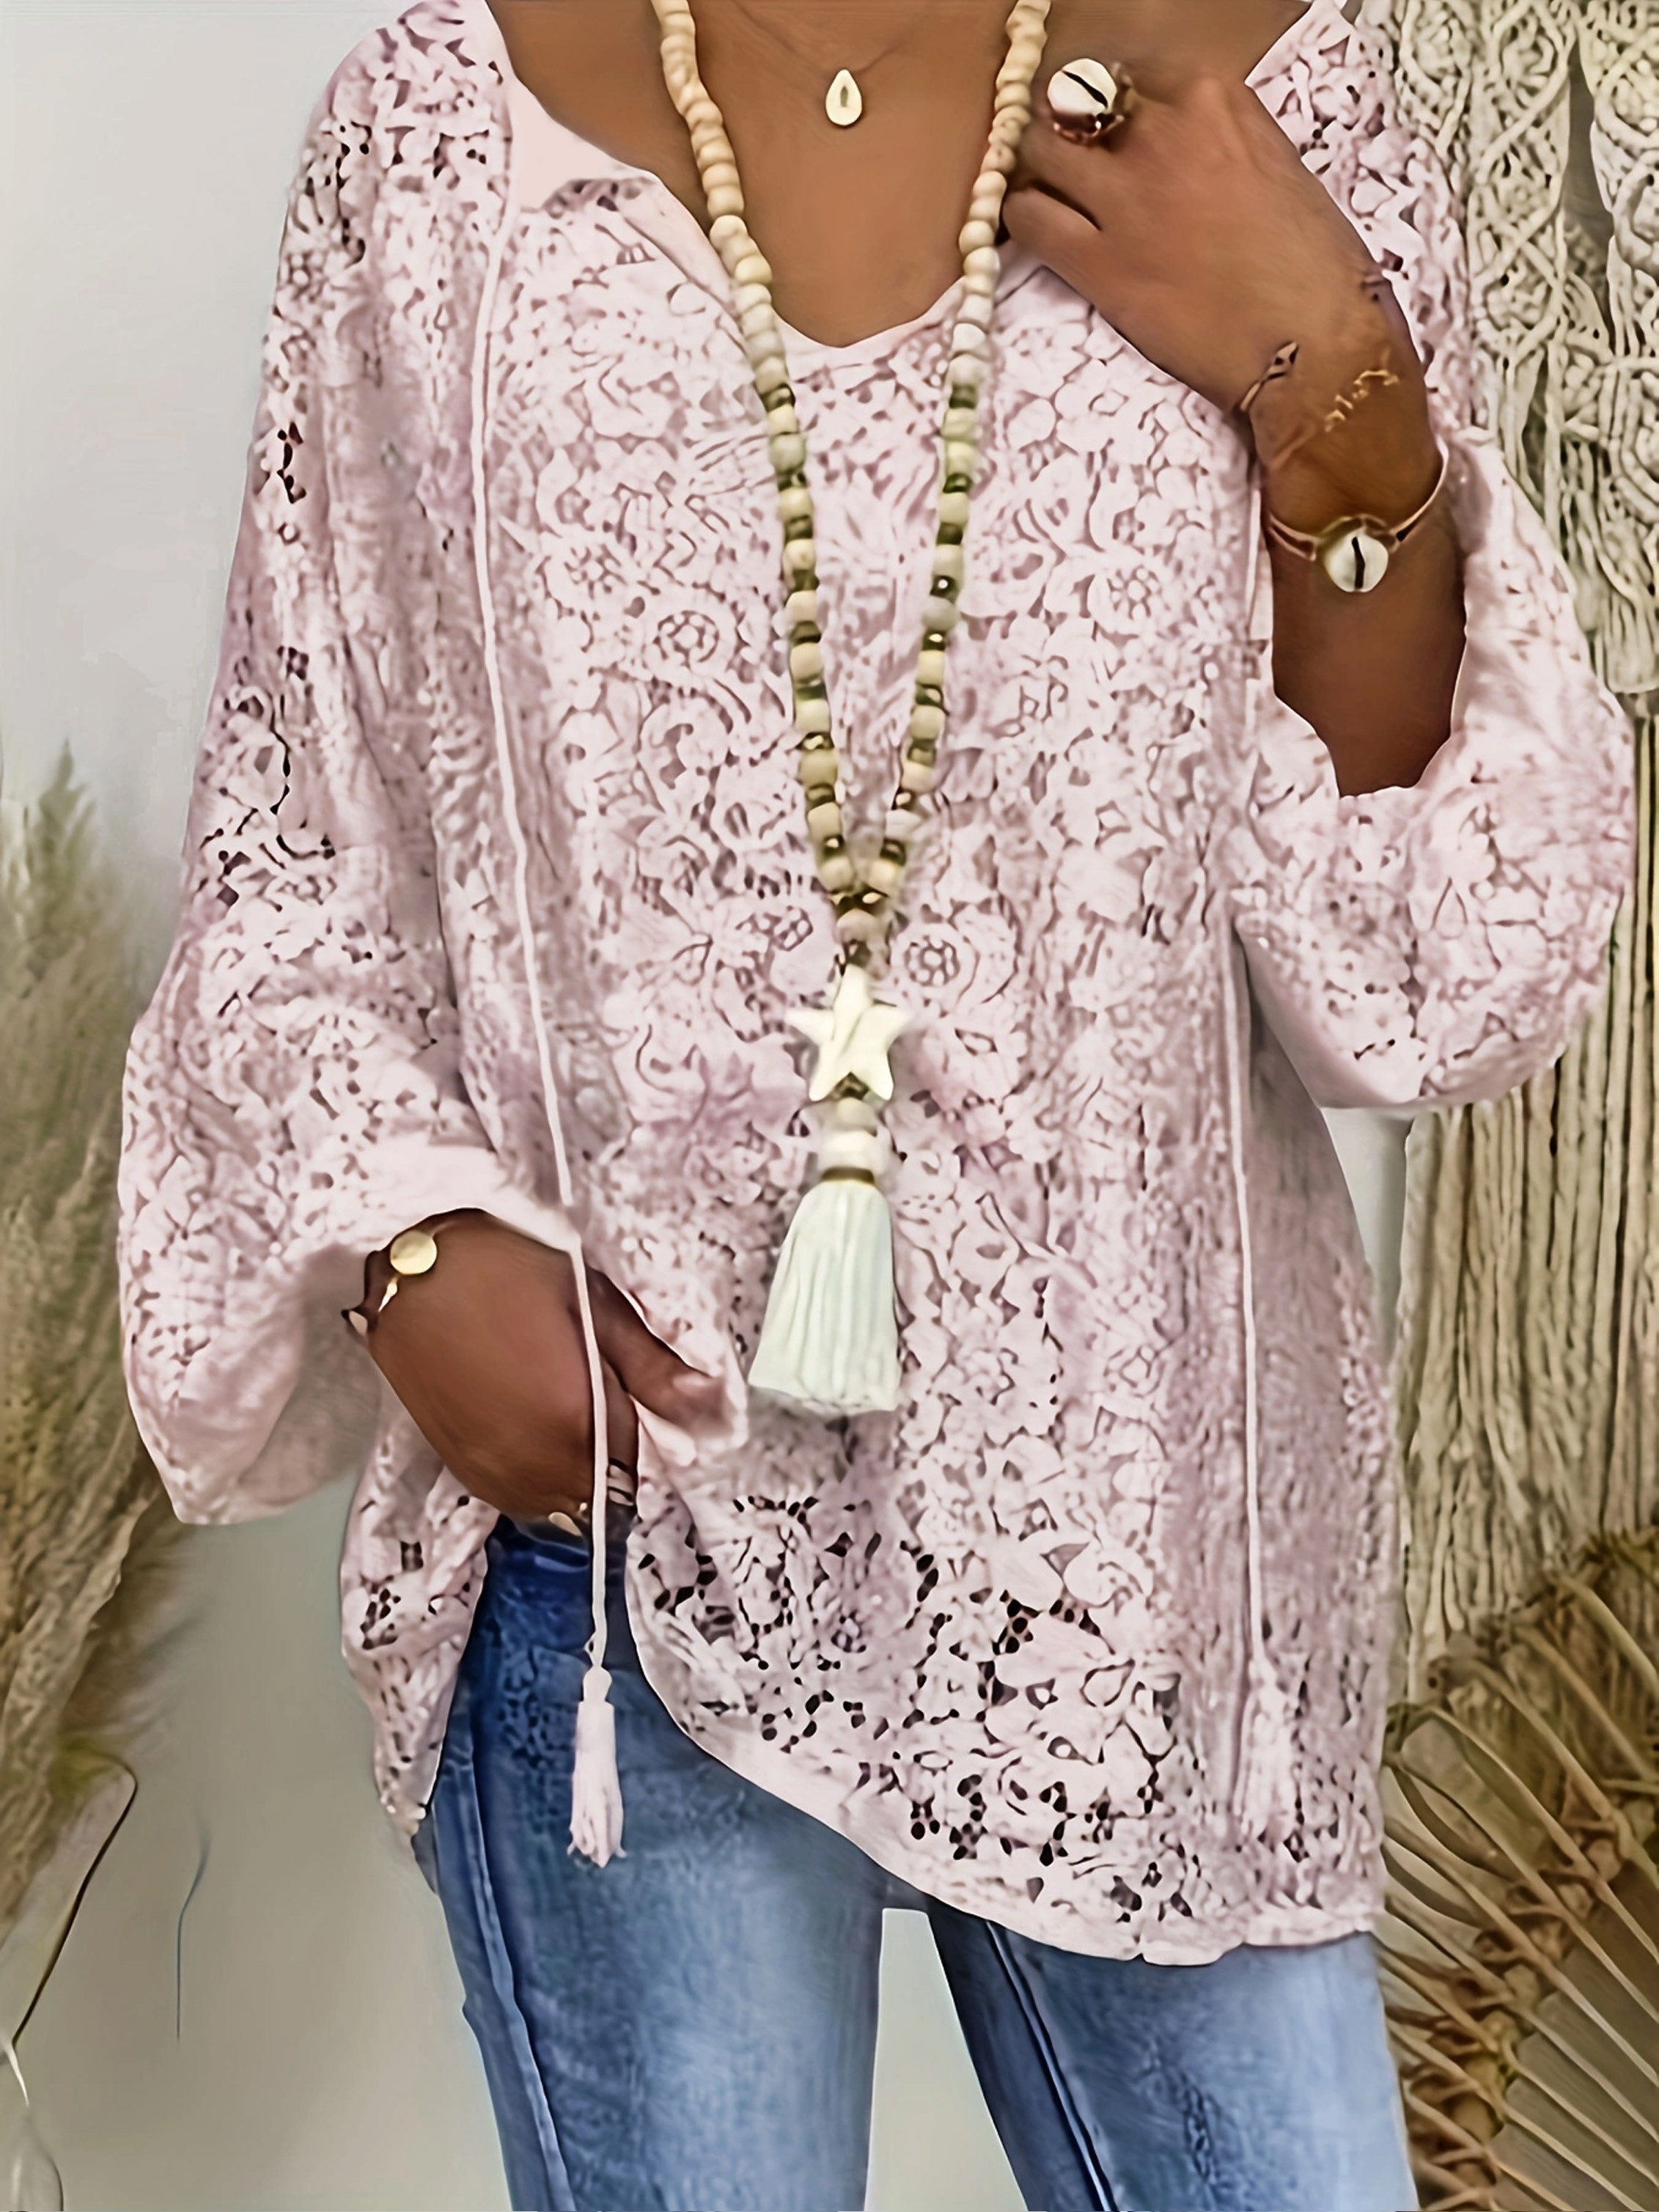 Woman Plus Size Tops Casual 3/4 Sleeve Shirts Lace Patchwork V